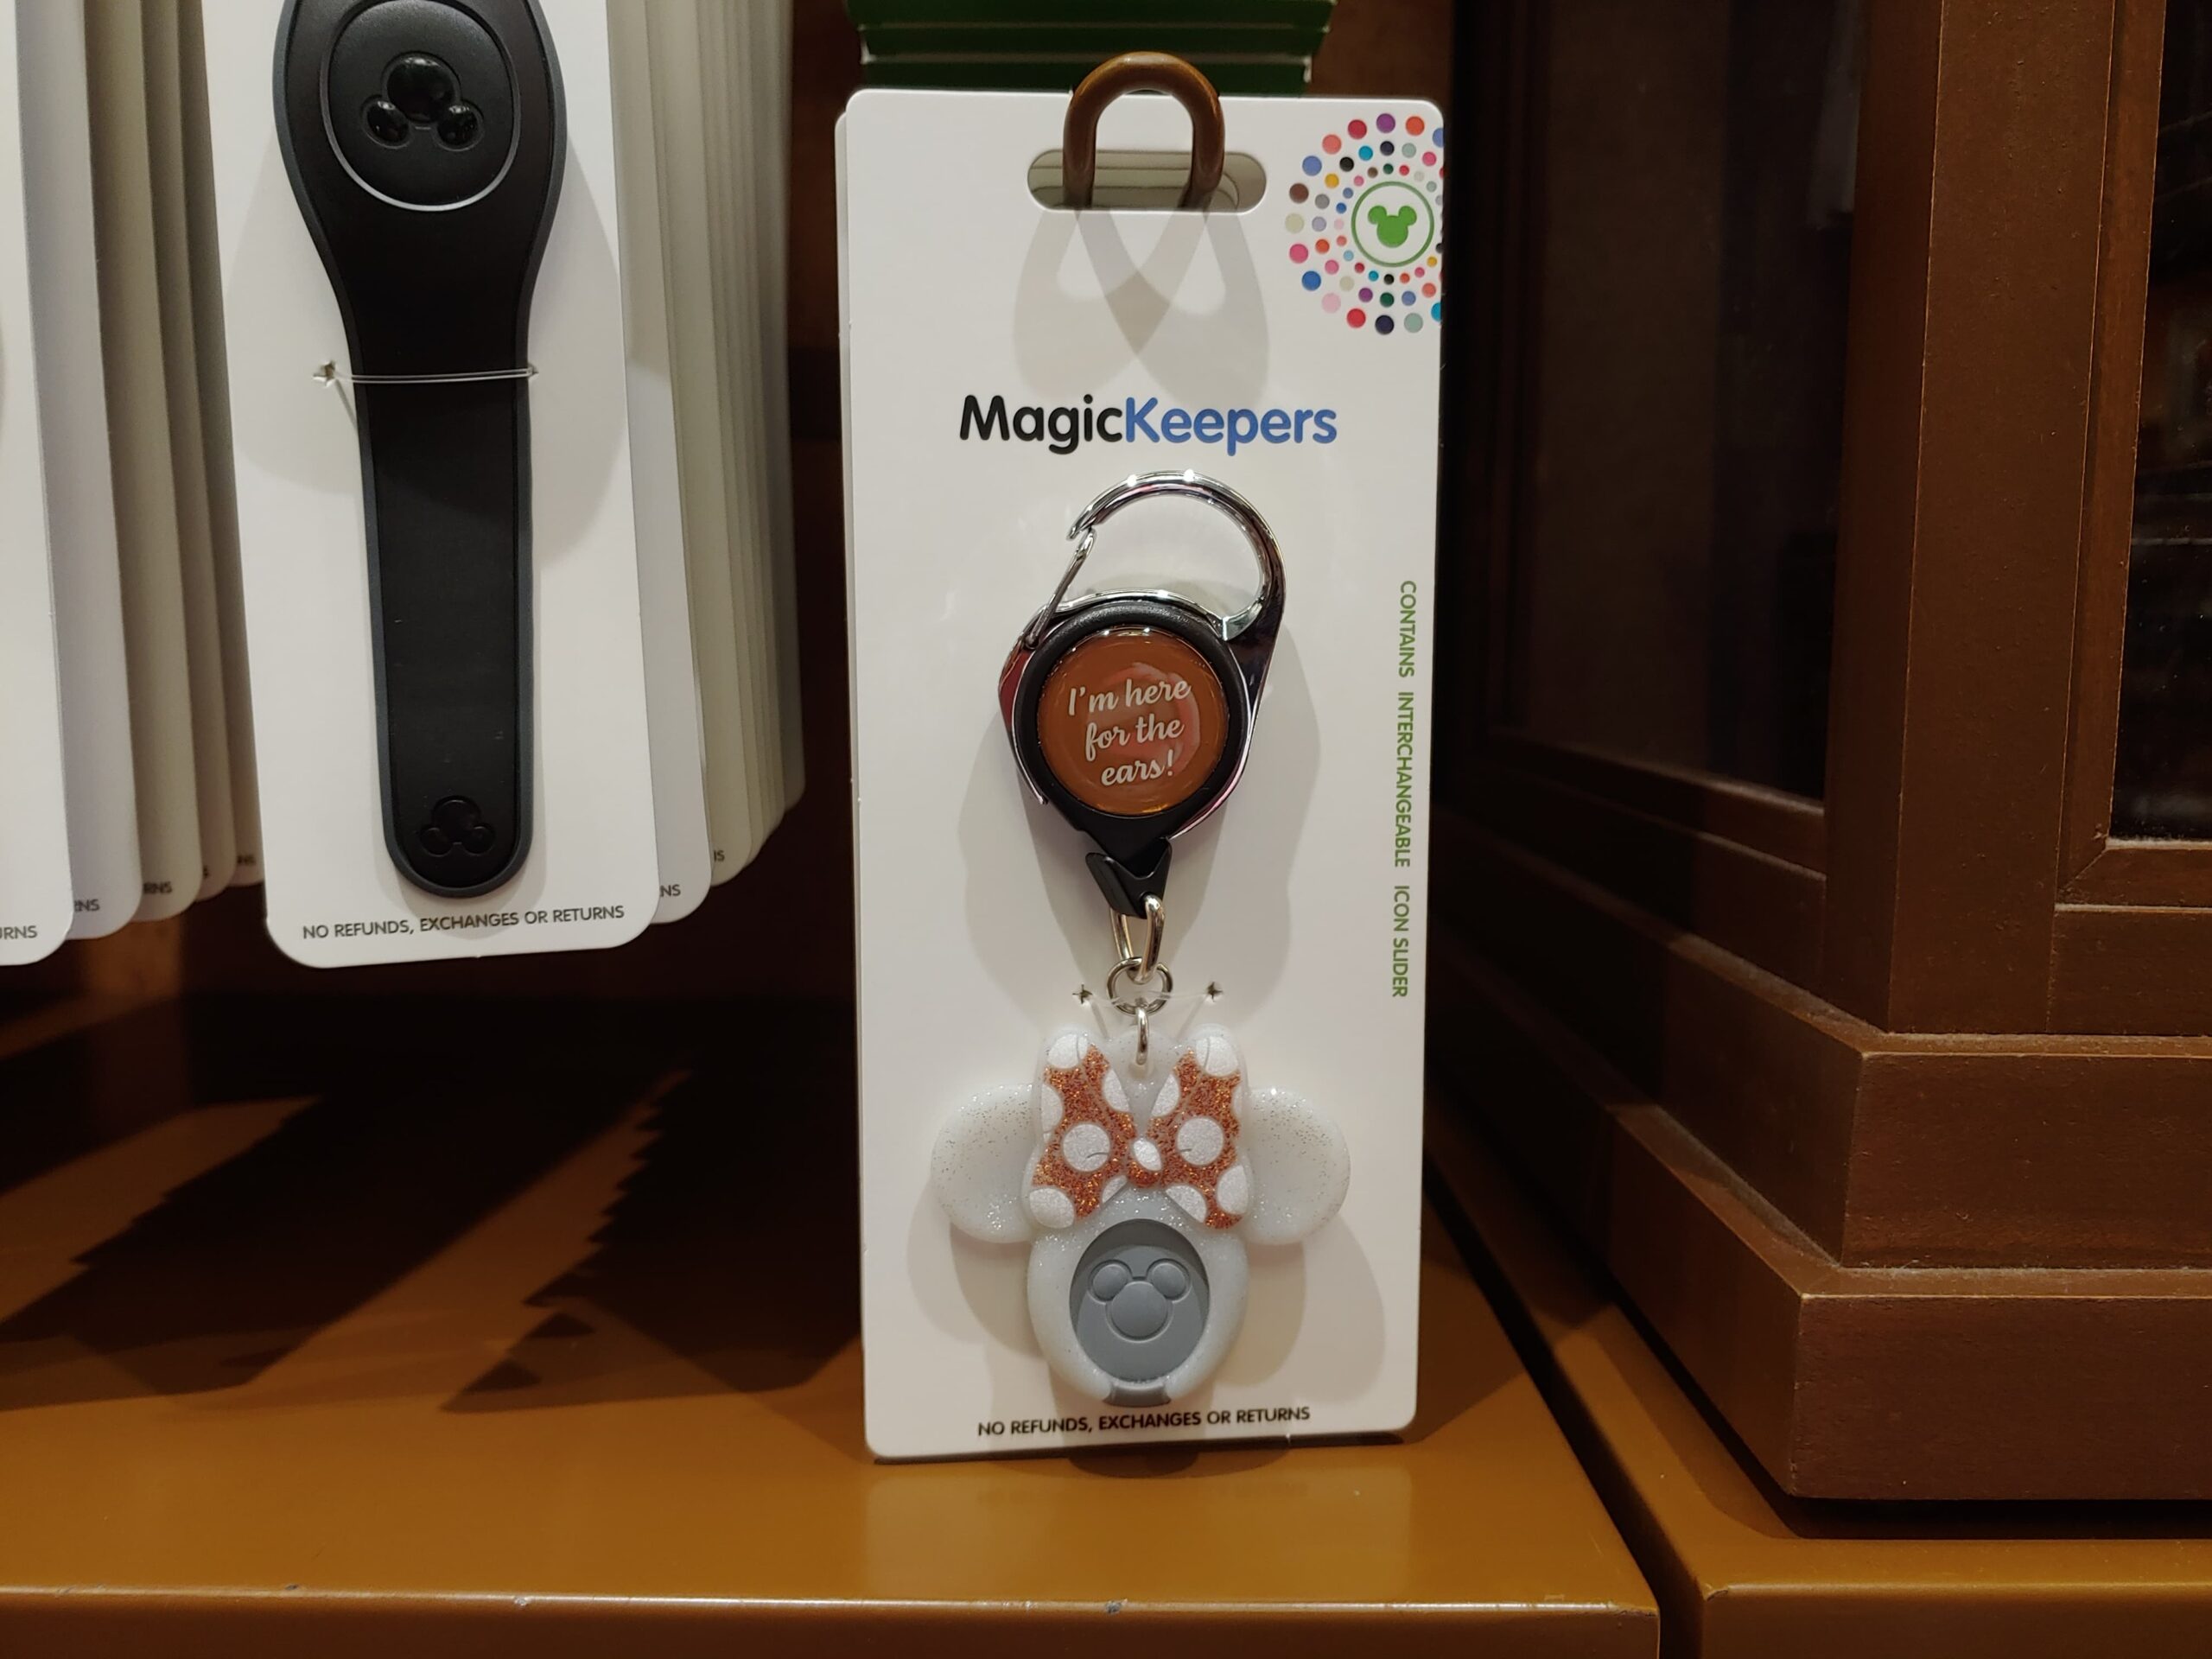 MagicKeepers! The New Retractable MagicBand Holders